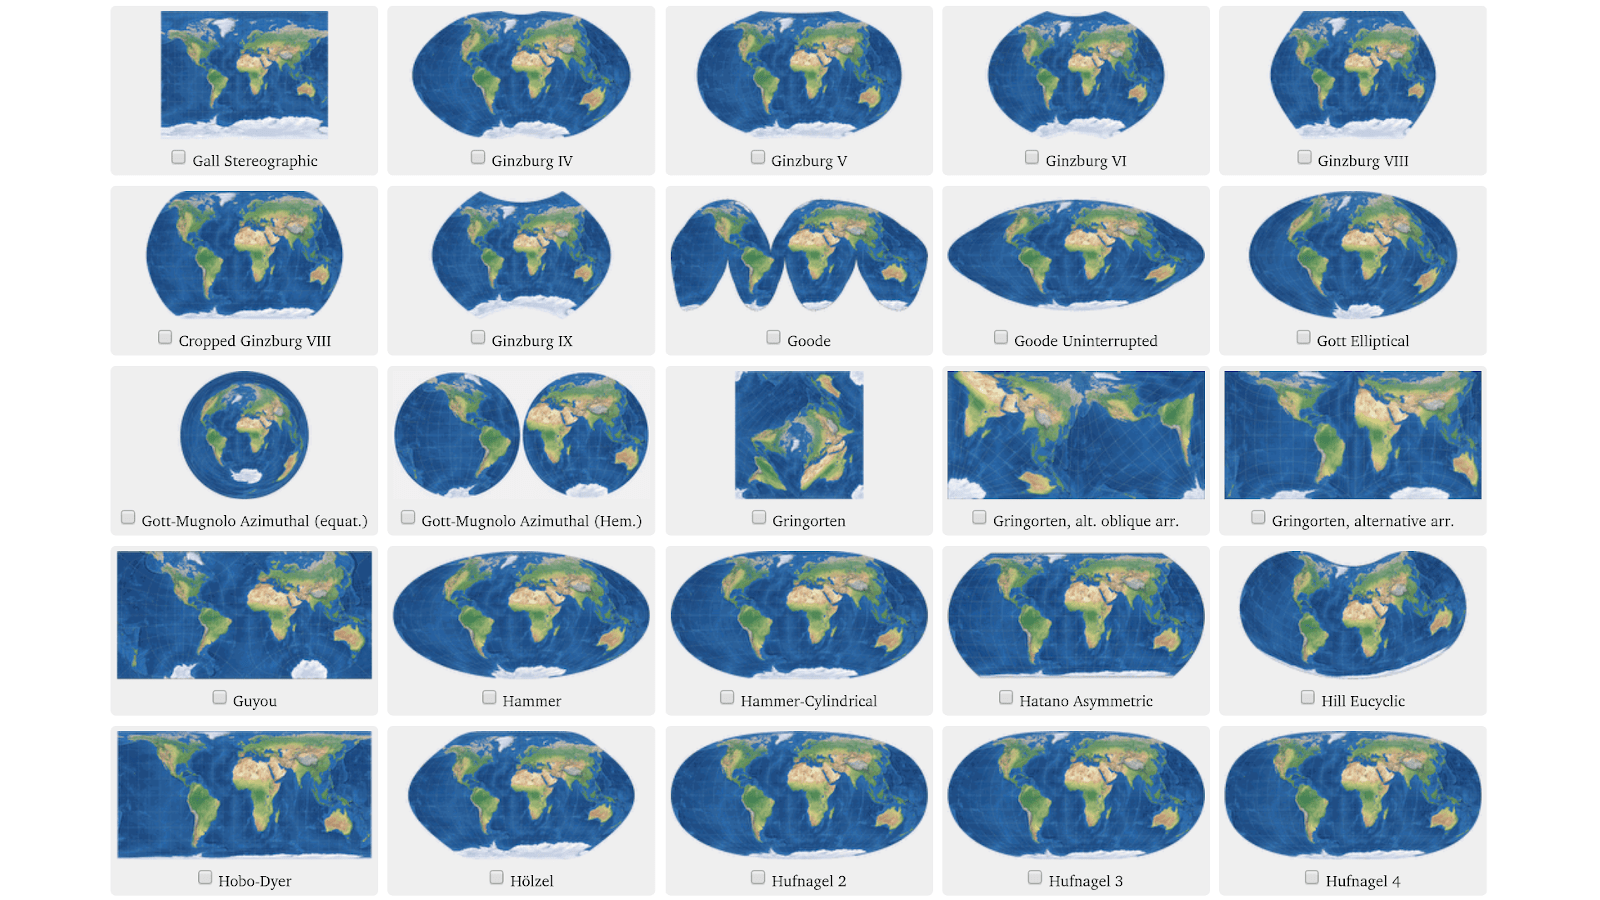 Some of the map projections